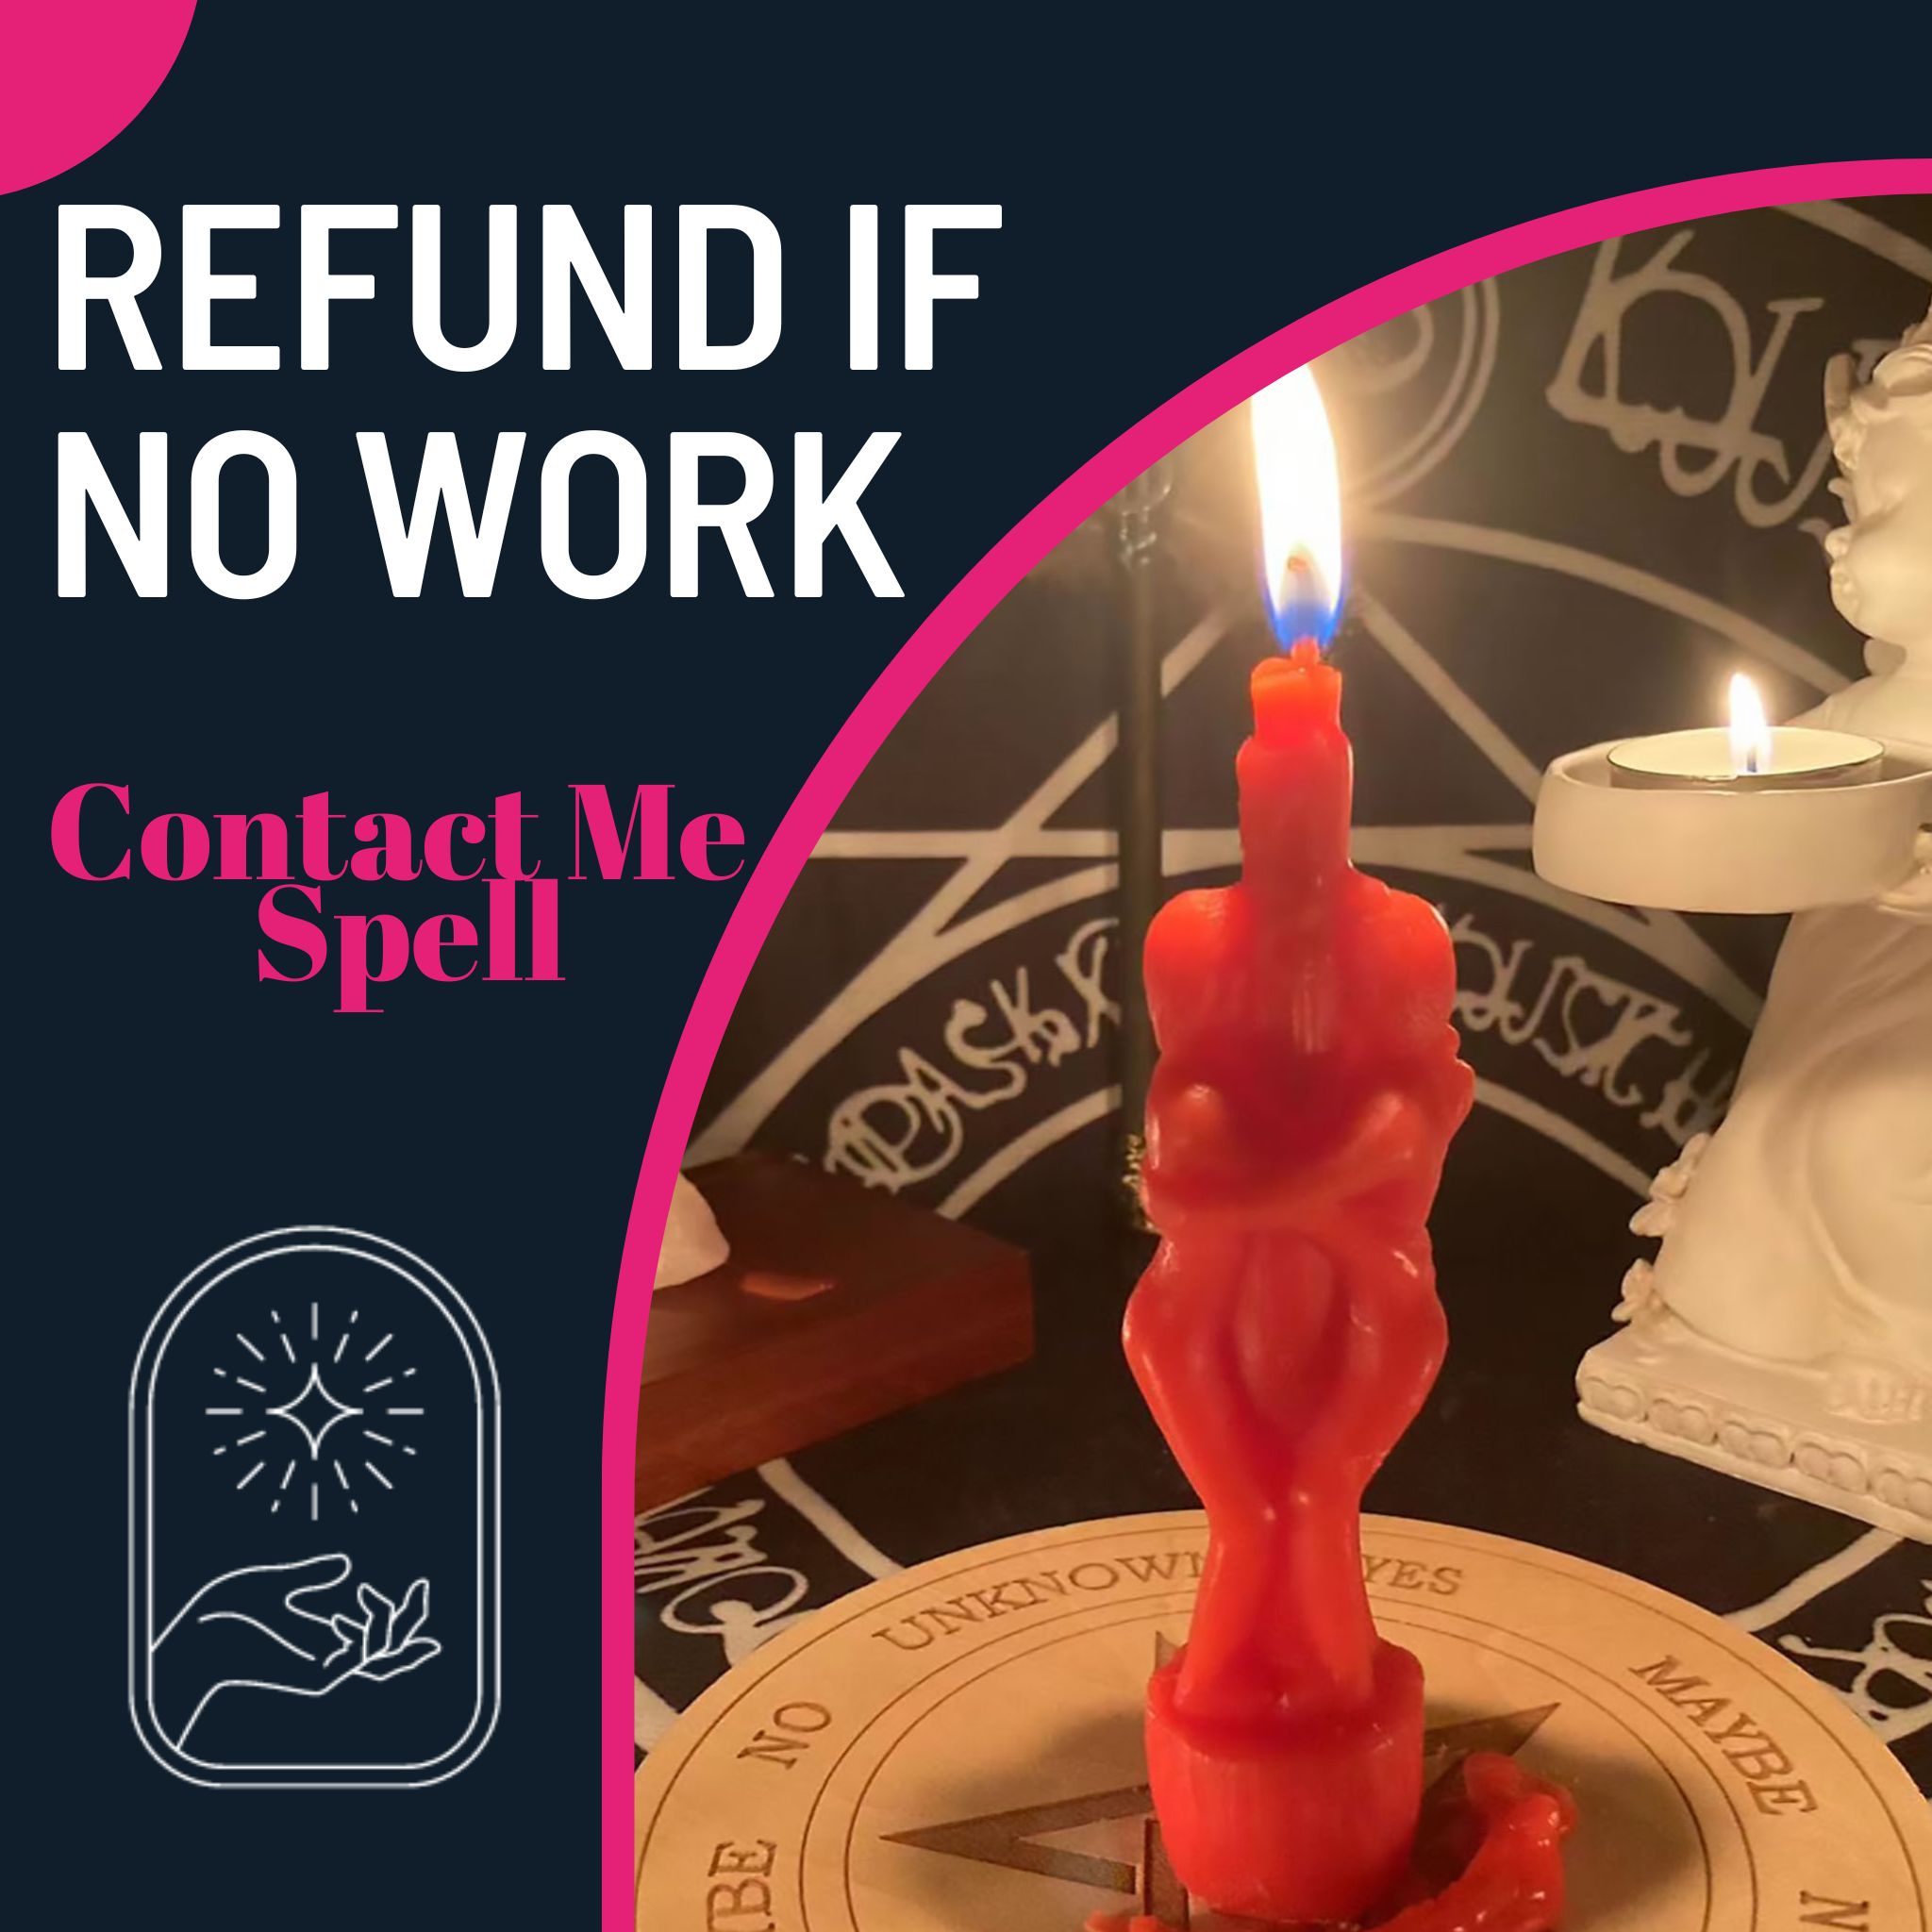 Contact Me Spell 【Refund if No Work】